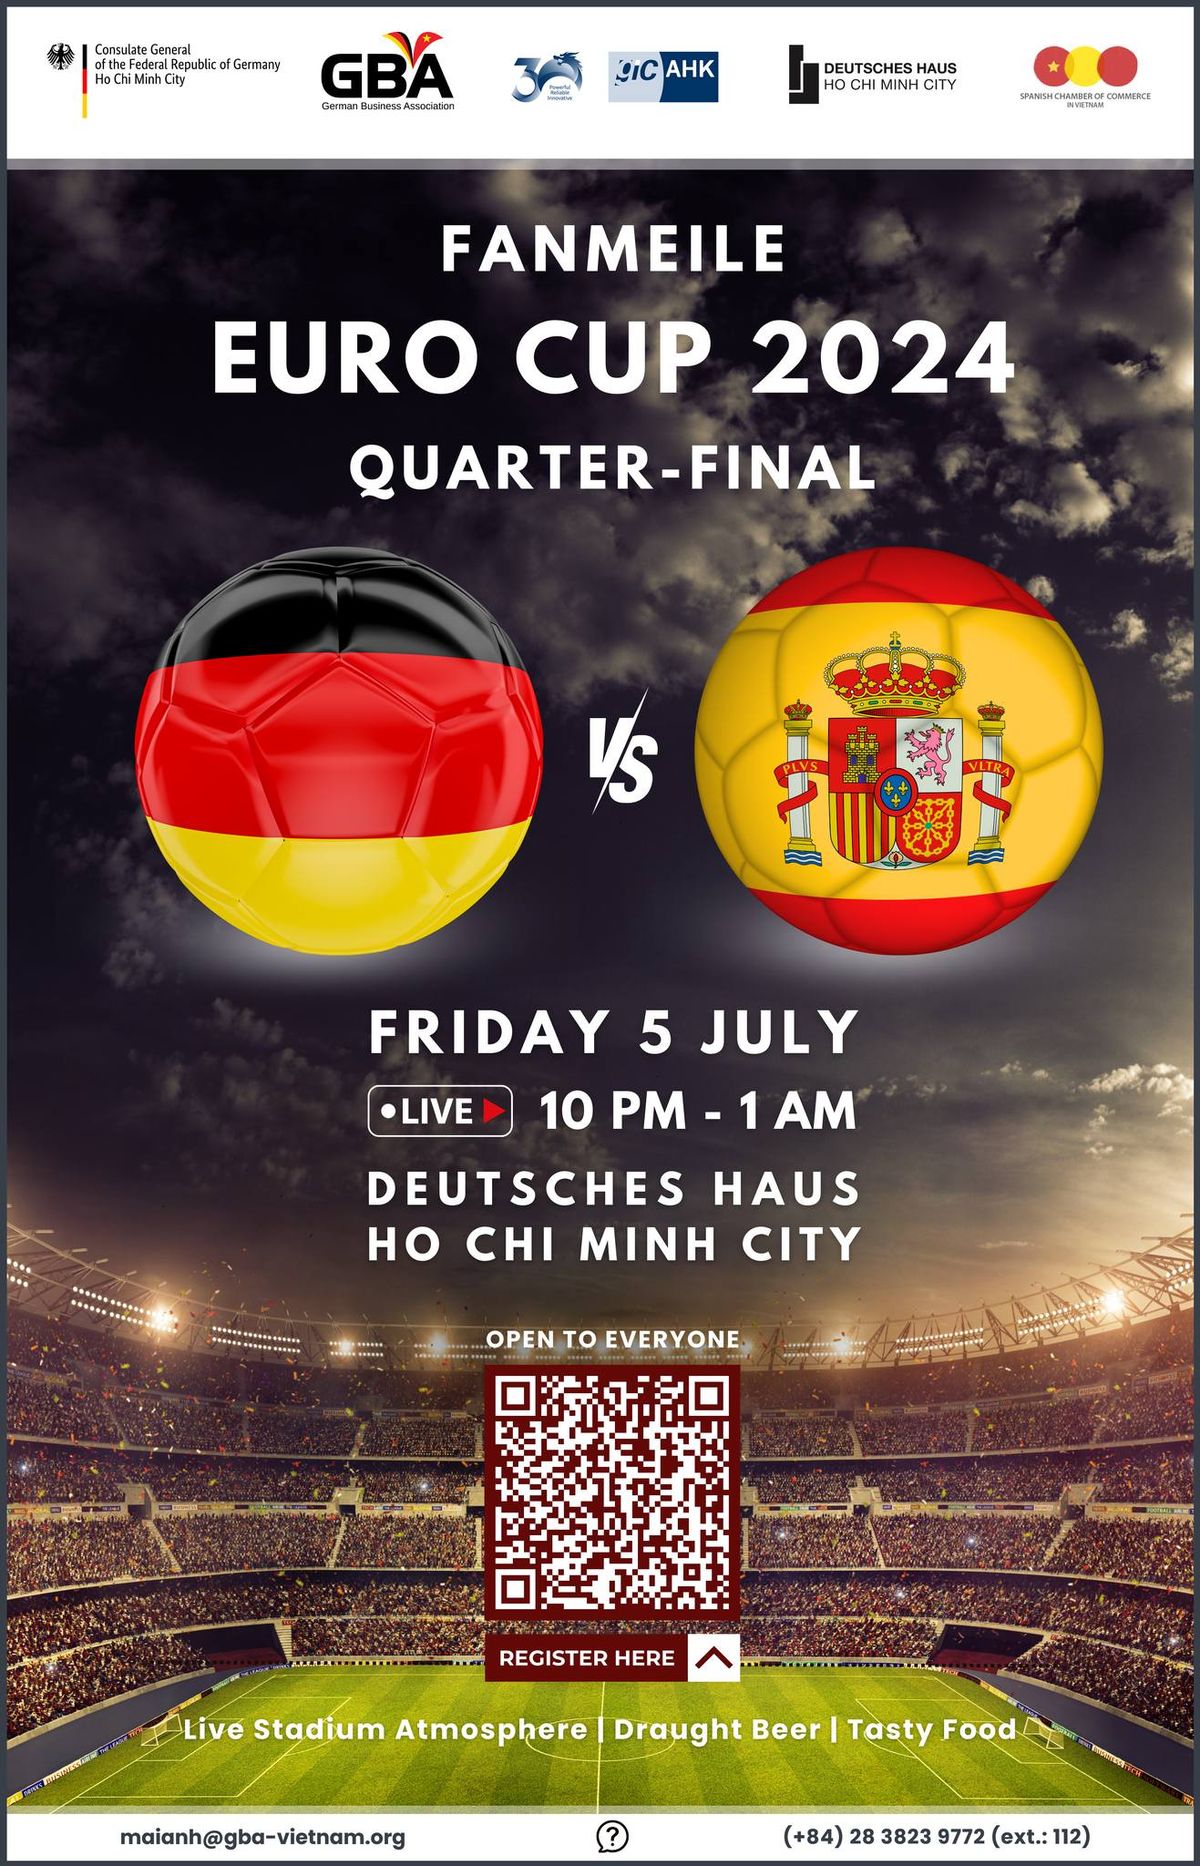 Fanmeile EURO CUP 2024 | Quarter-final Germany vs. Spain